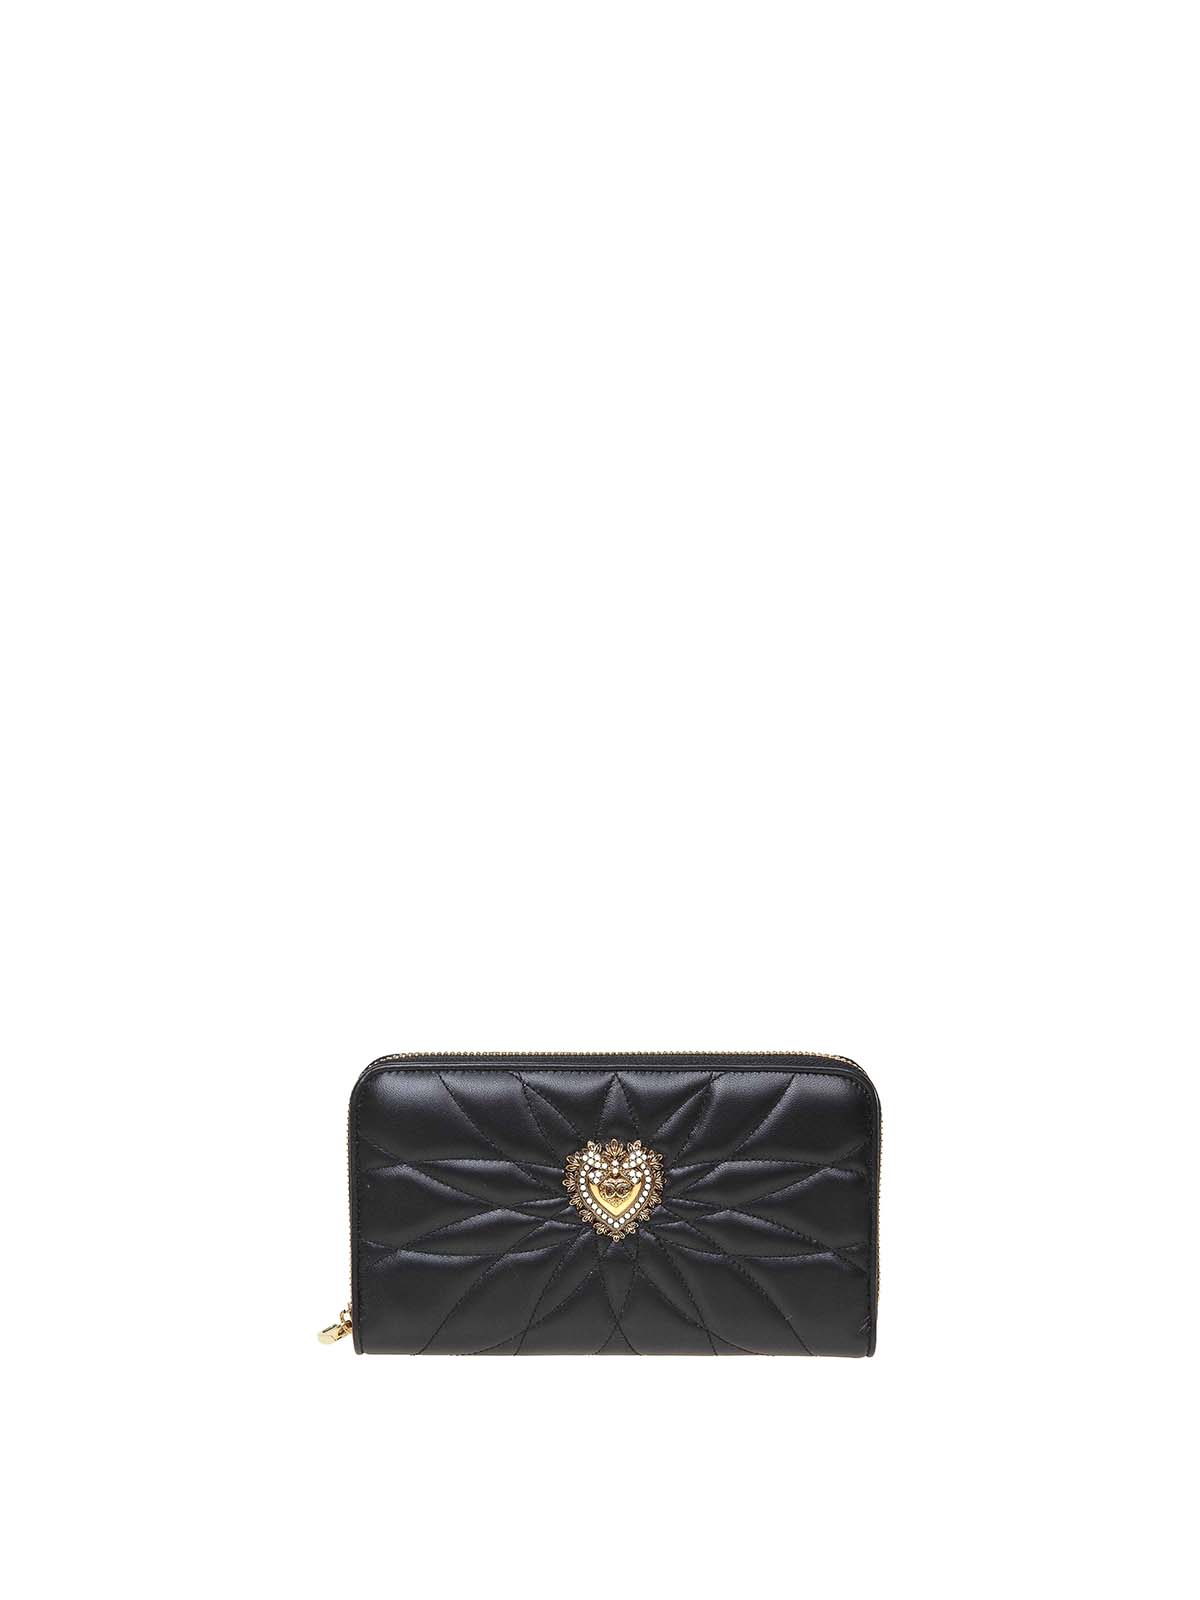 DOLCE & GABBANA DEVOTION BLACK QUILTED LEATHER WALLET